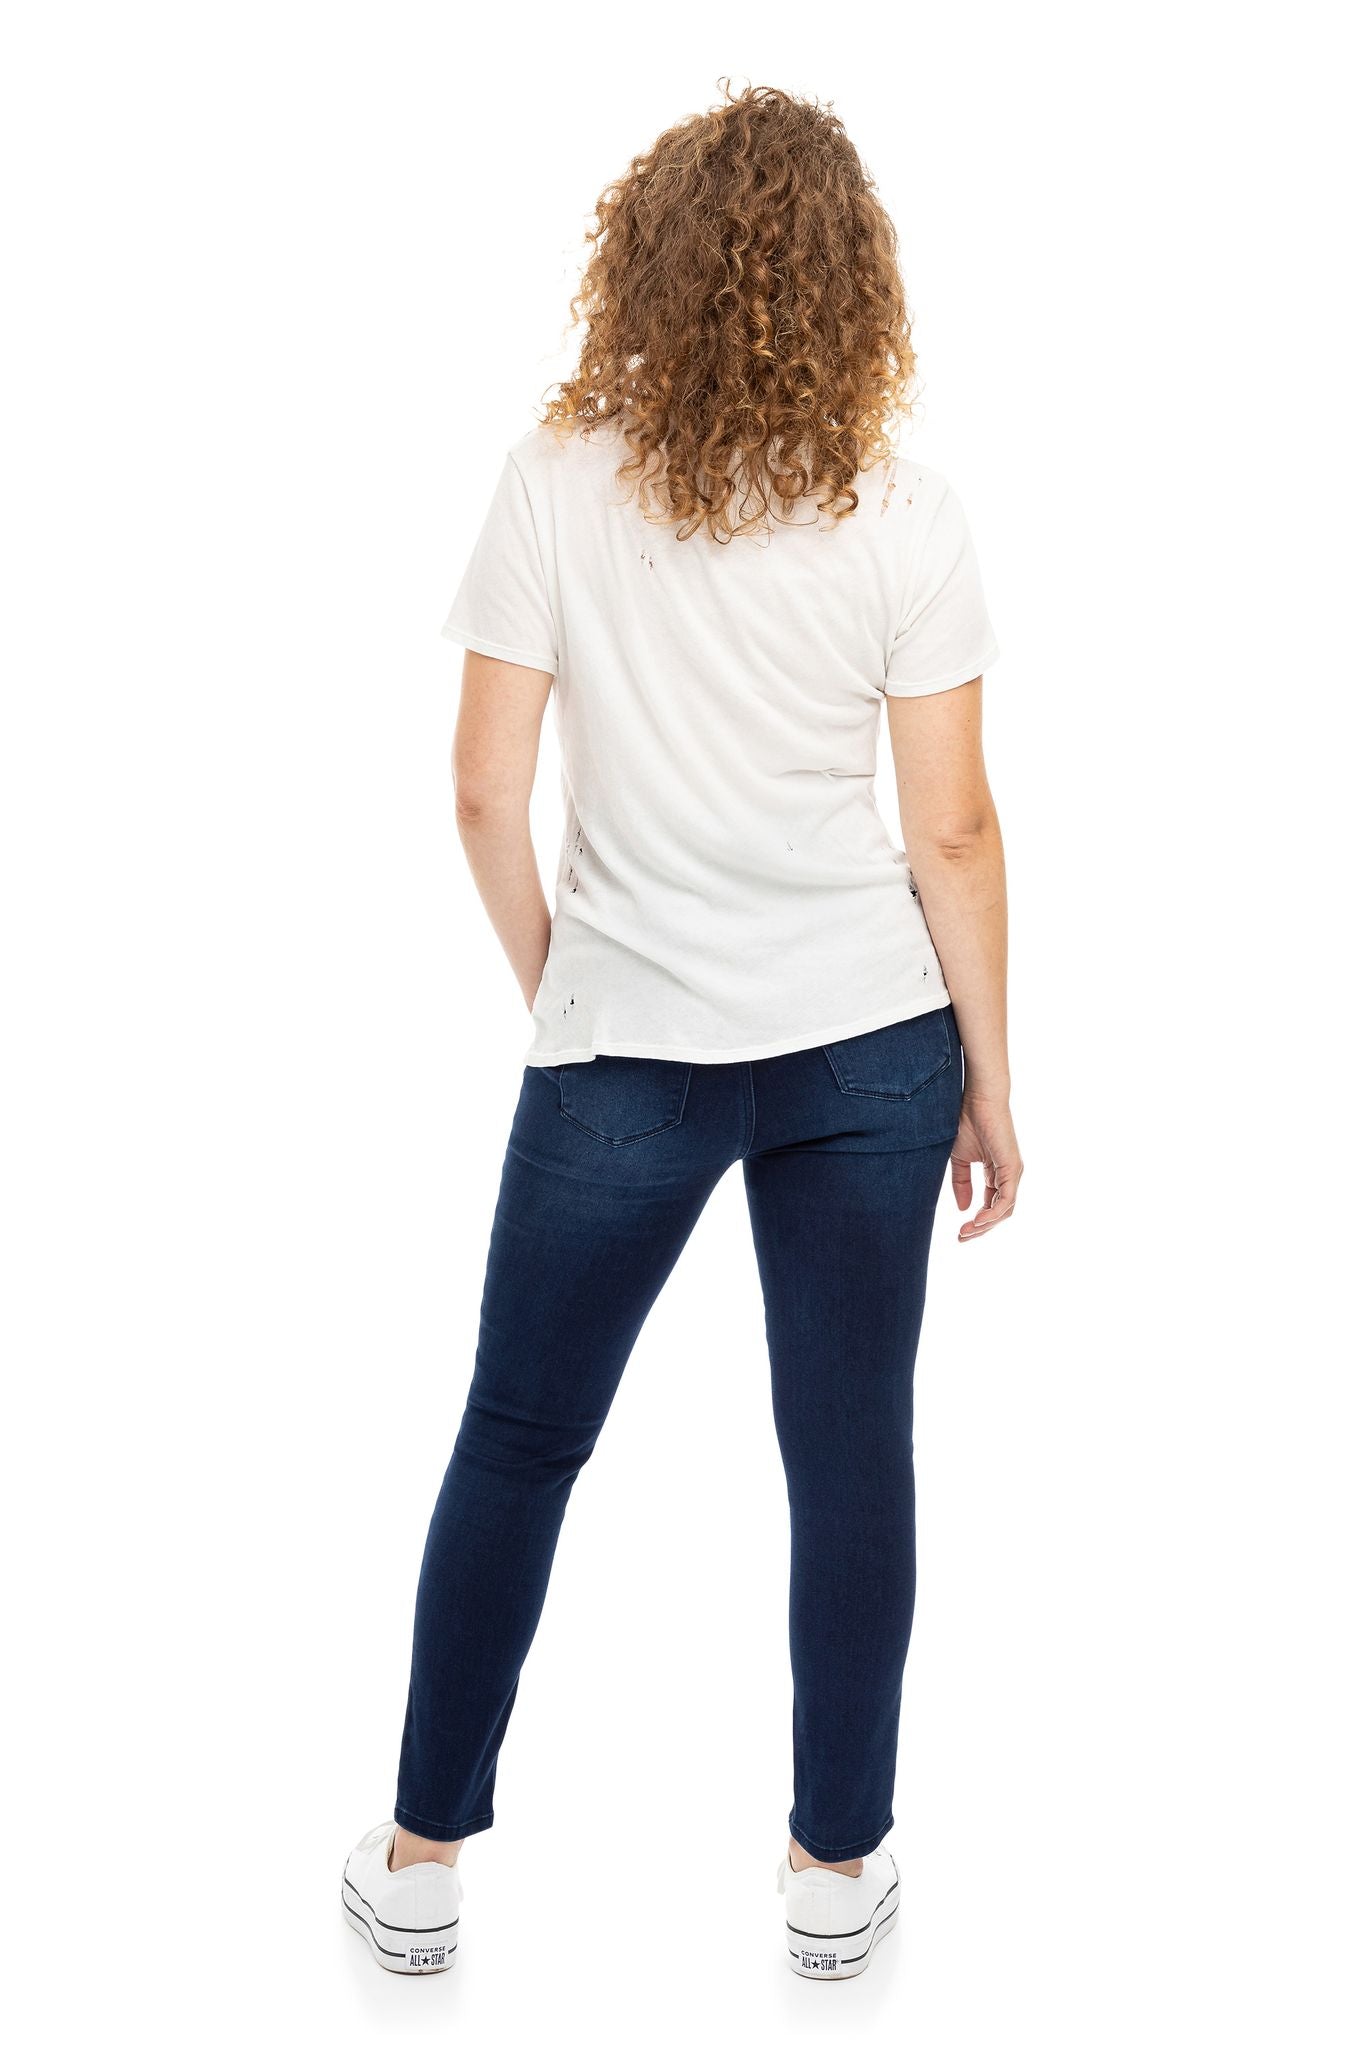 Maternity Butter Skinny w/ Bellyband in Marco